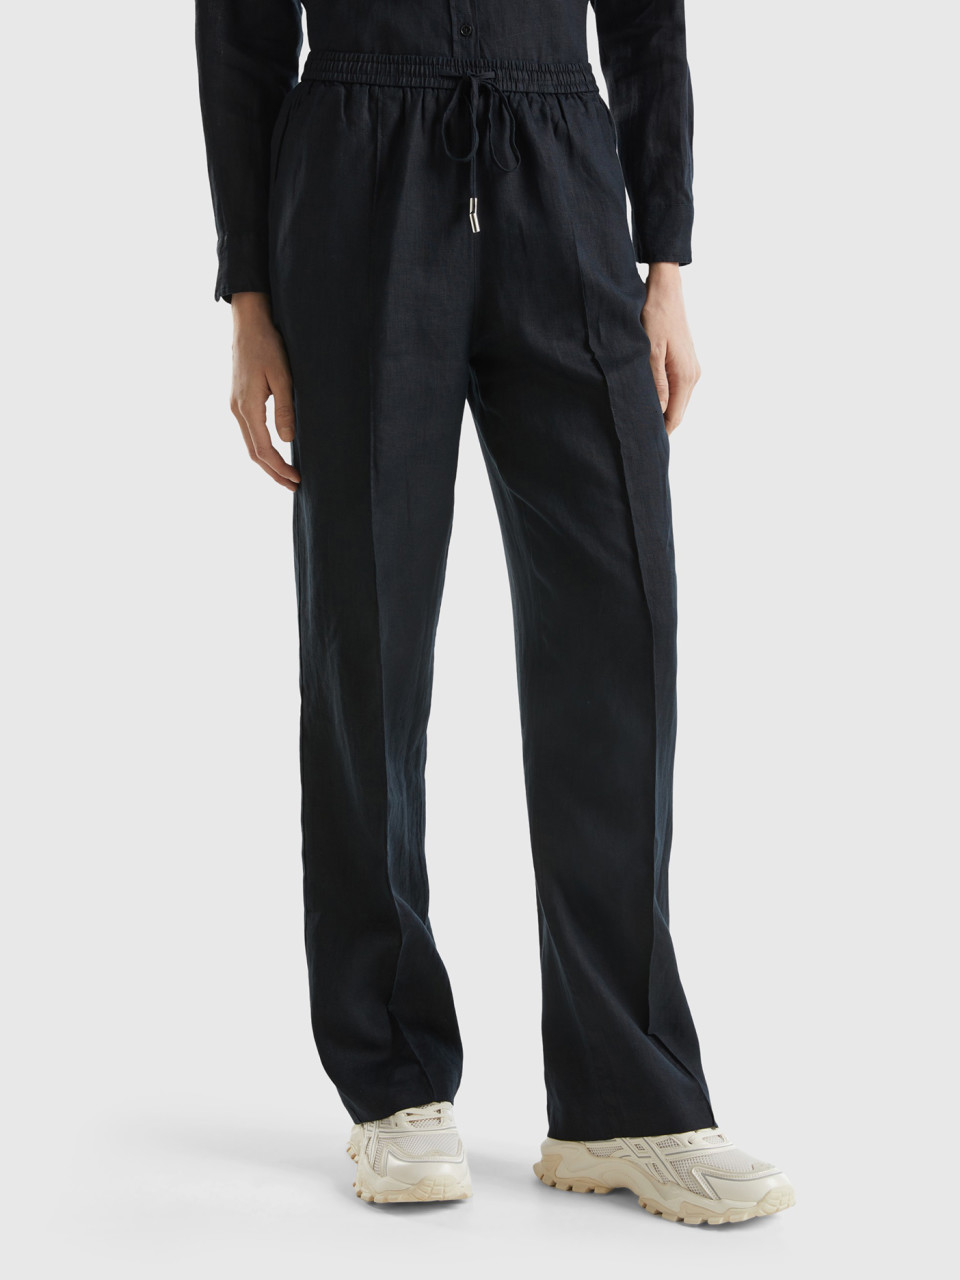 Benetton, Trousers In Pure Linen With Elastic, Black, Women